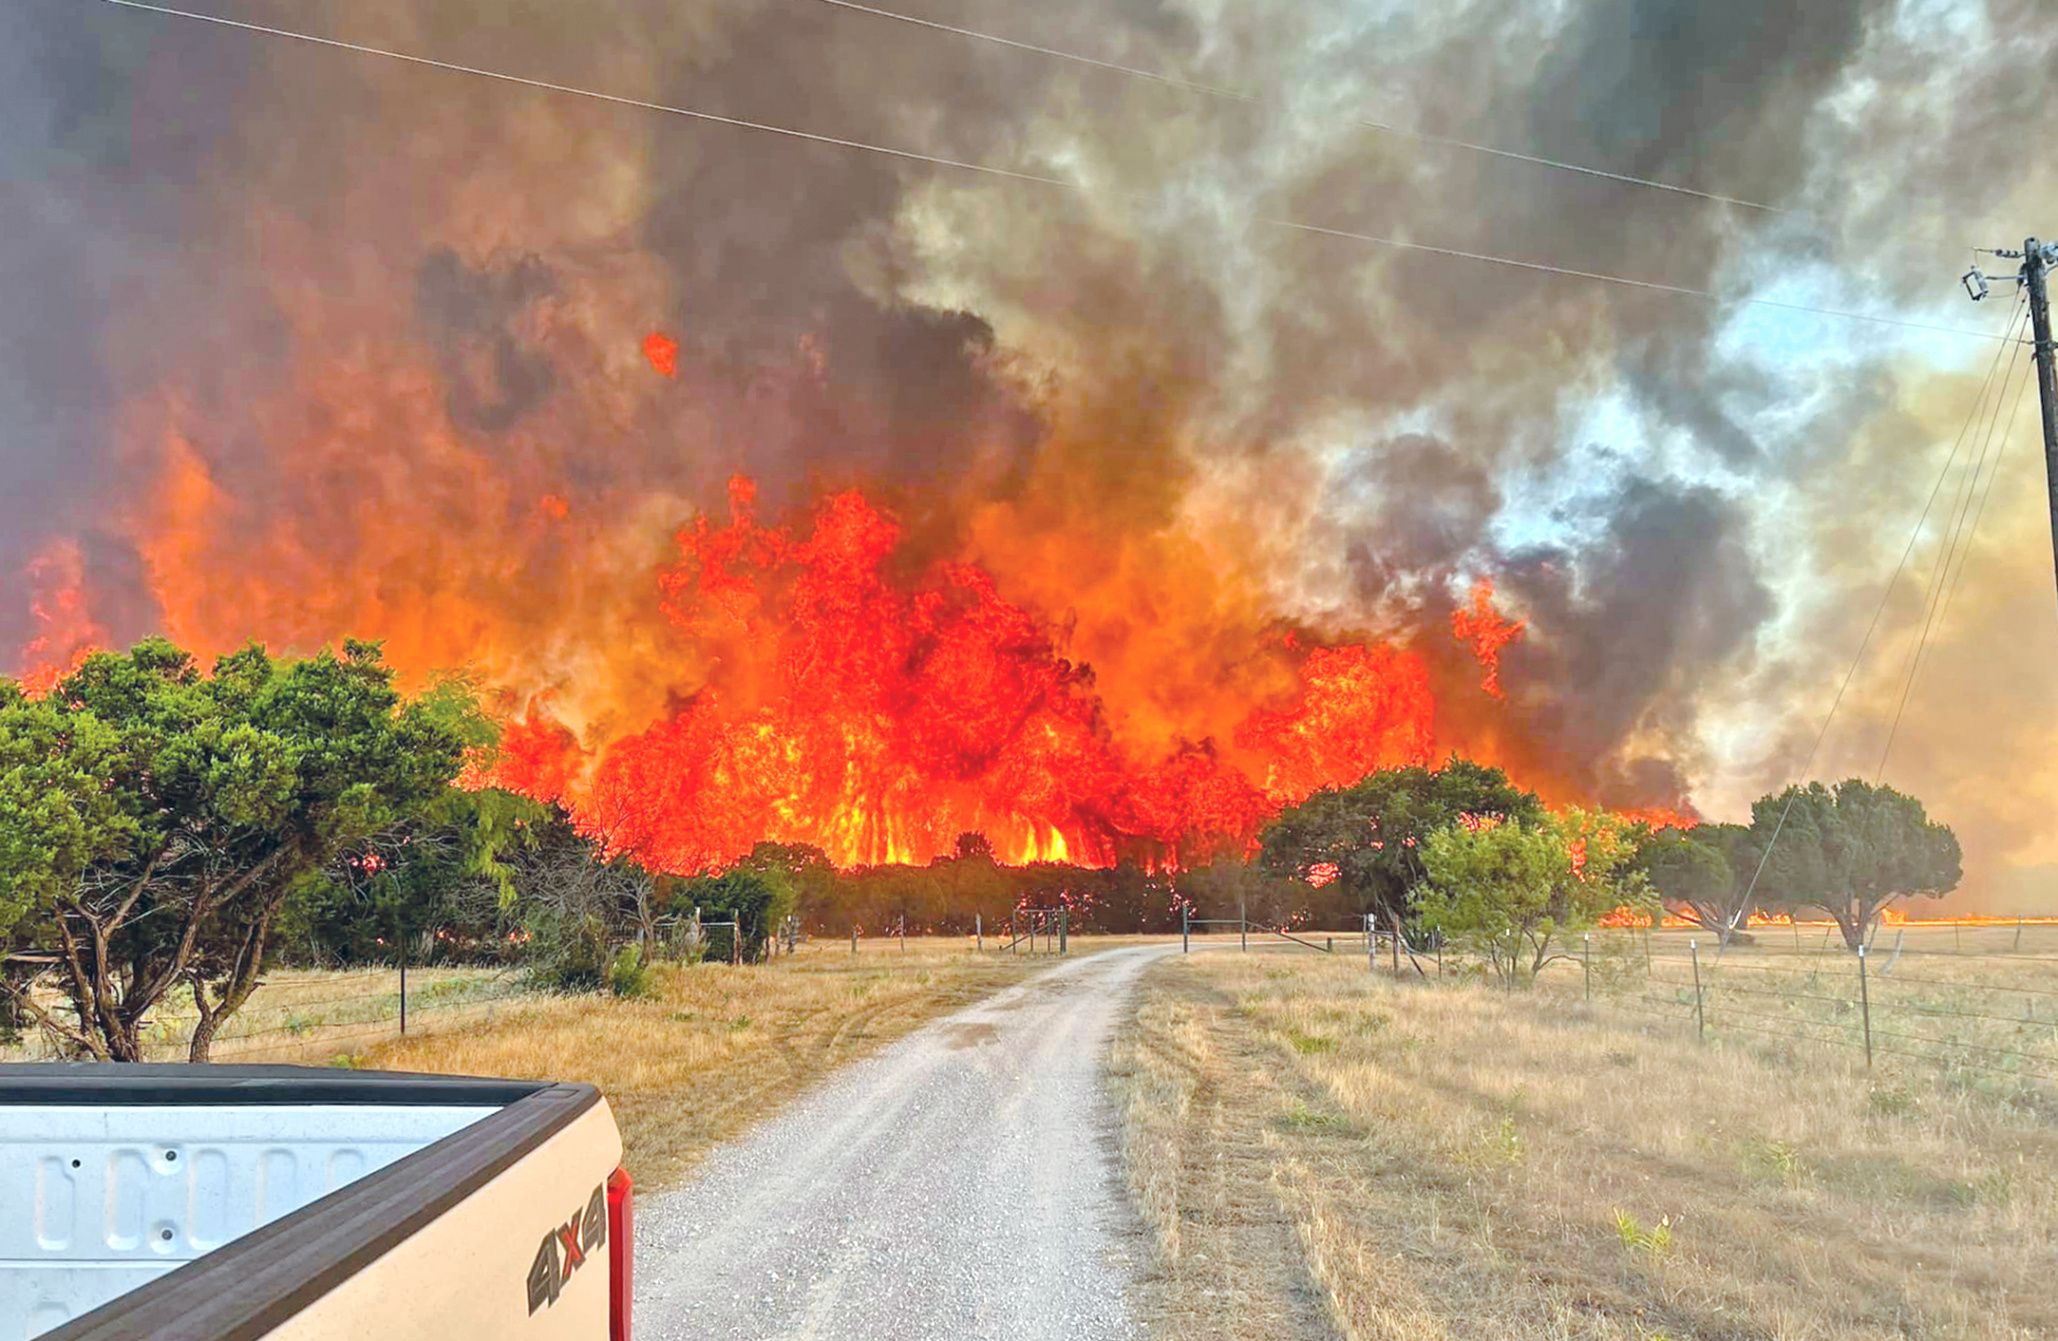 Vpn Services In Palo Pinto Tx Dans Over 10,000-acre Dempsey Fire Blazes In Palo Pinto County ...